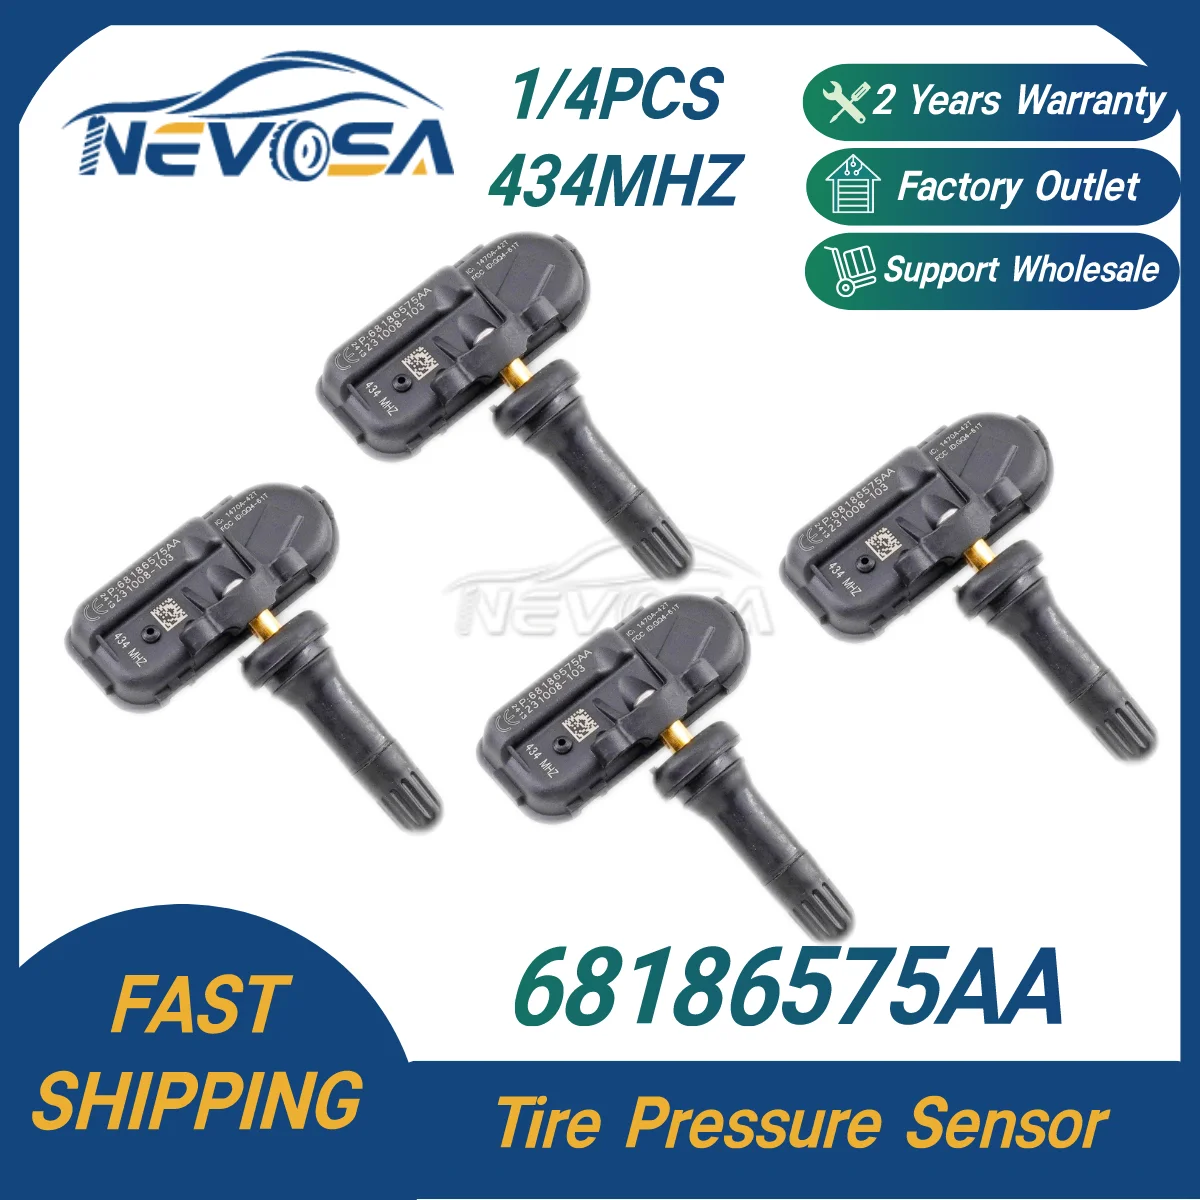 

Nevosa 68186575AA 68239720AB 68249197AA TPMS Tire Pressure Monitoring System For RAM 1500 2500 3500 Jeep Cherokee 434MHz 1/4PCS